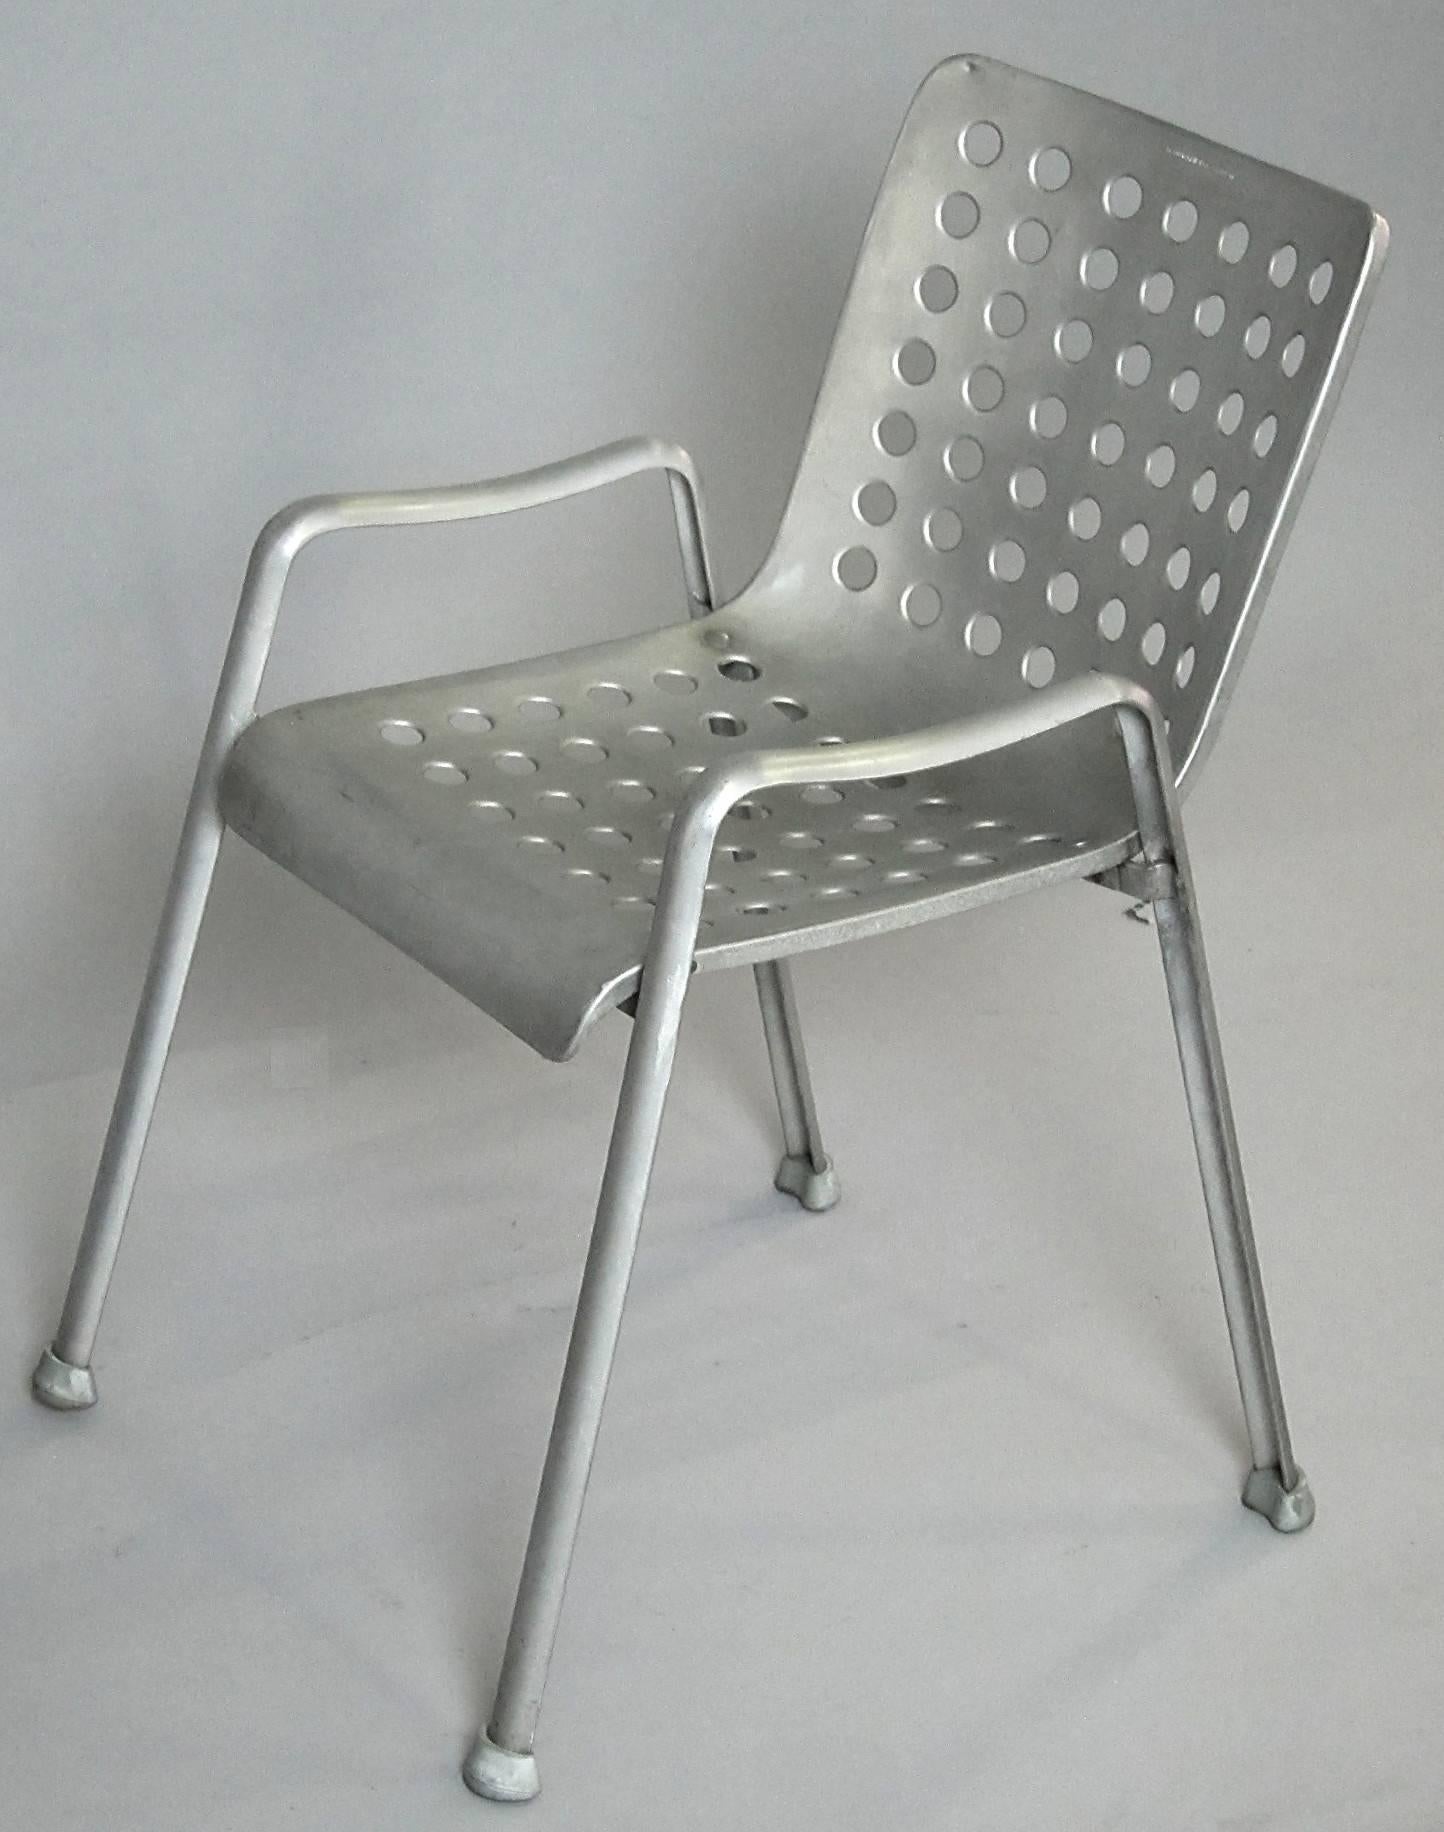 This very light and stackable chair did its Duty in 1939 on the Swiss National Exhibition, what it was designed for by the Swiss designer and artist Hans Coray.
1st Edition manufactured by Metallwarenfabrik Waedenswil, anodized aluminum.